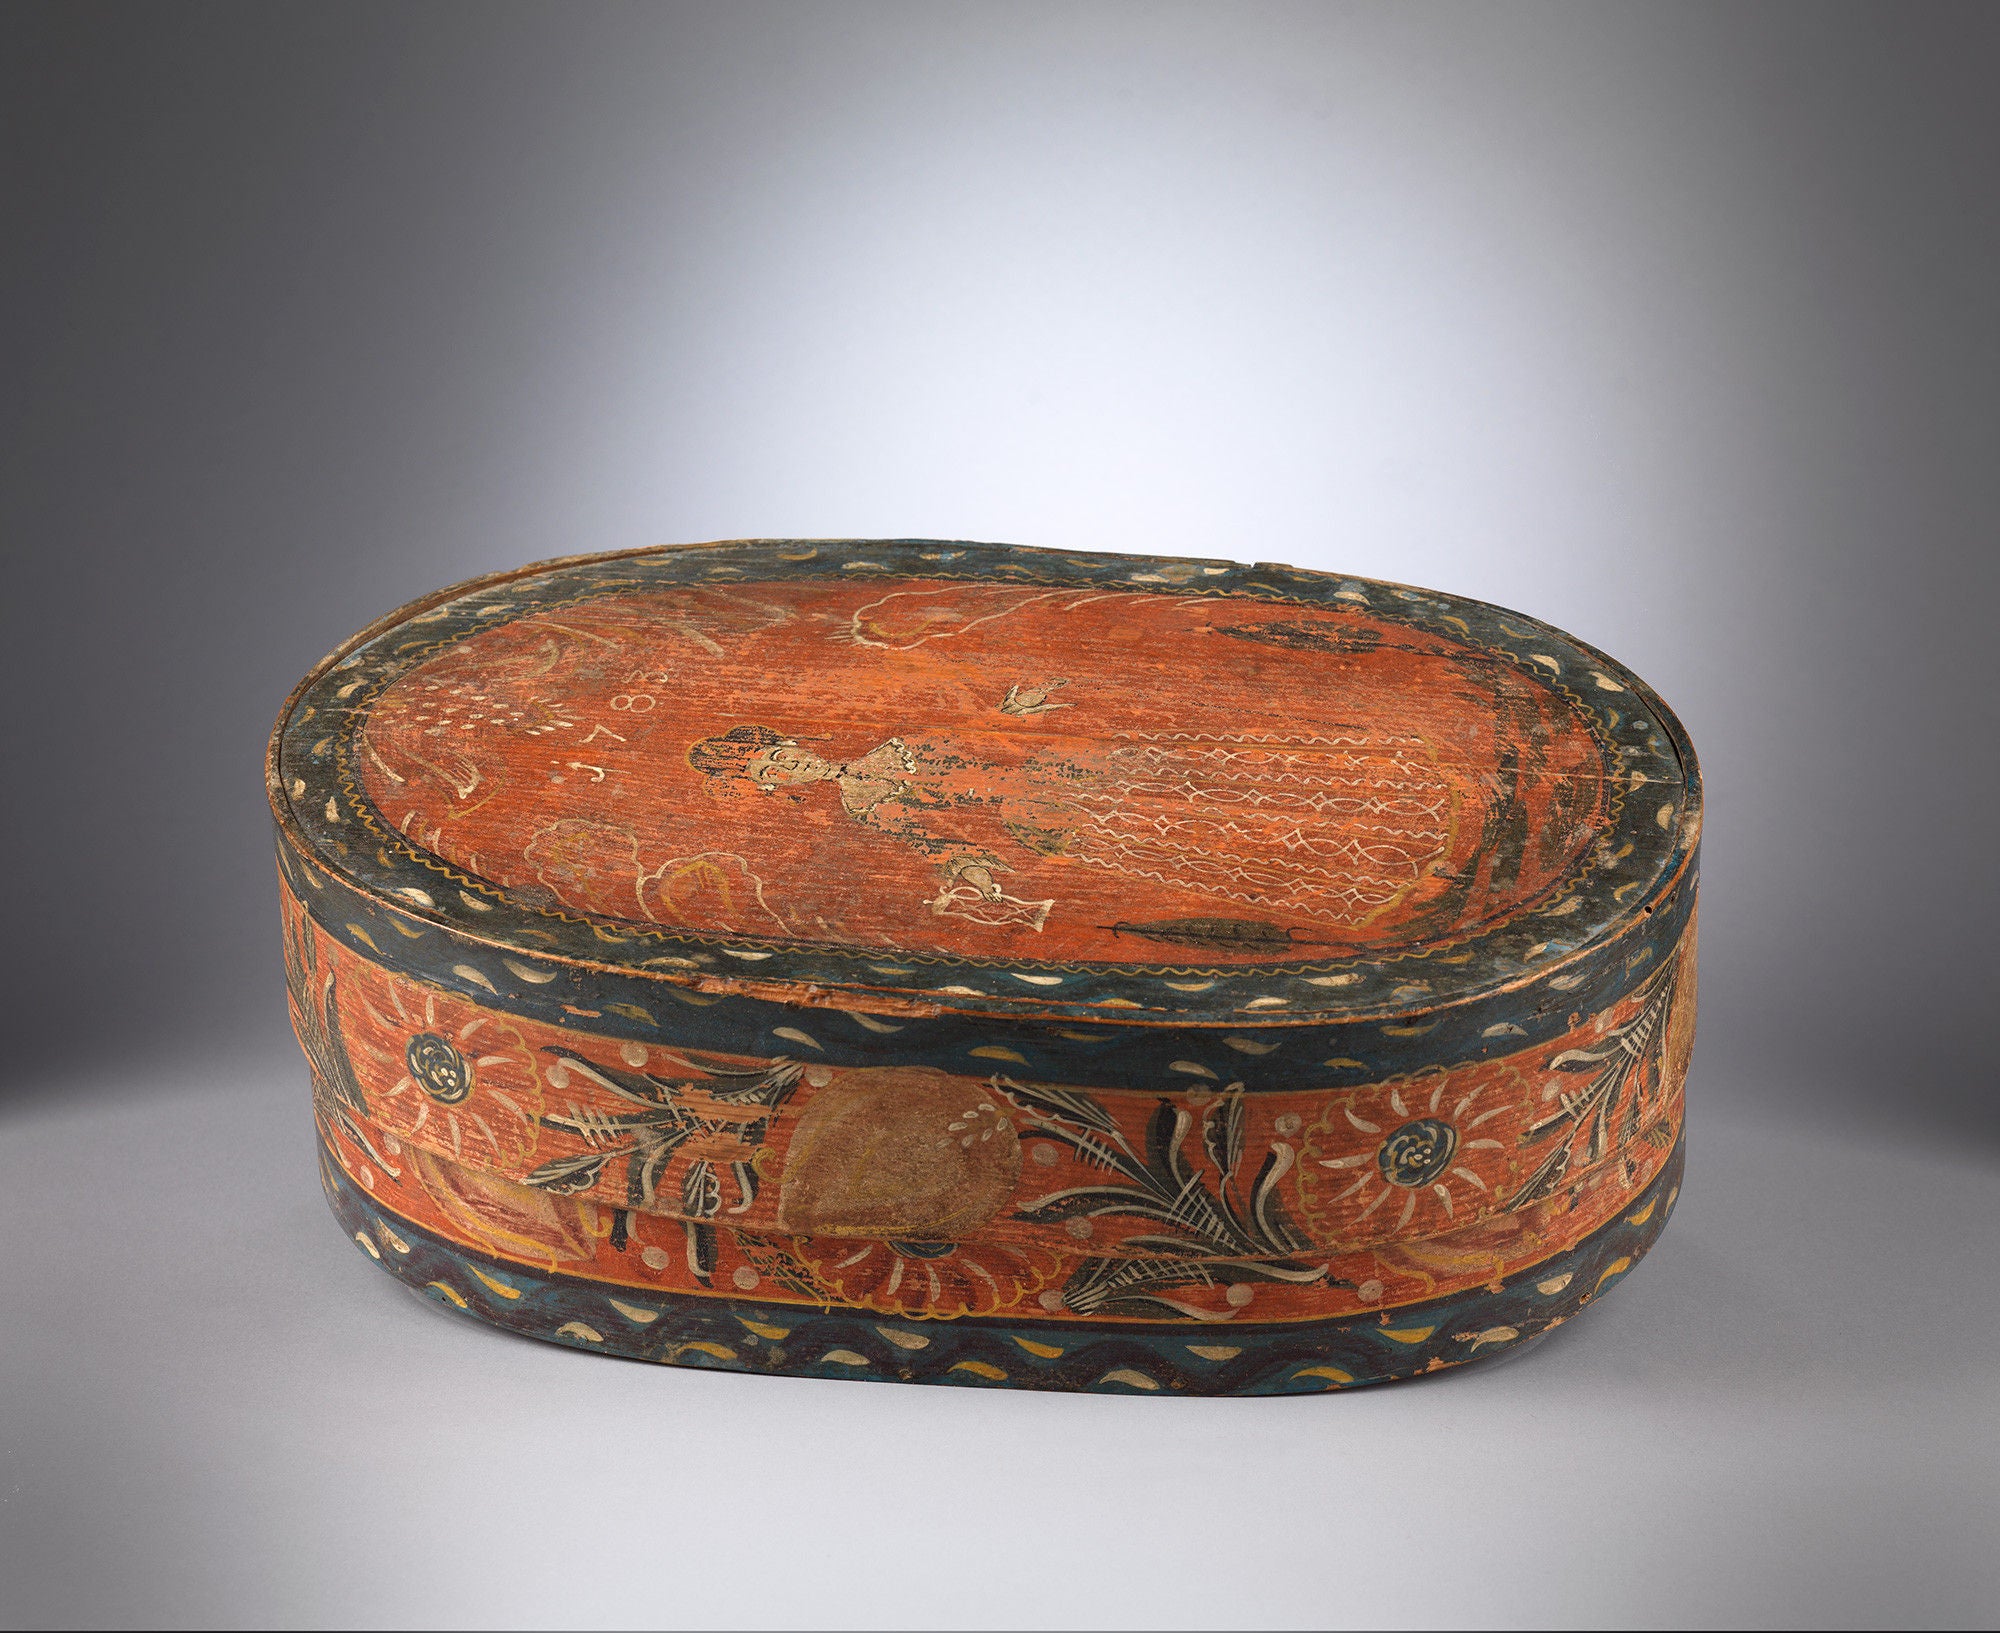 Remarkable Collection of Six Oval Bride's Boxes or "Brautschachteln"